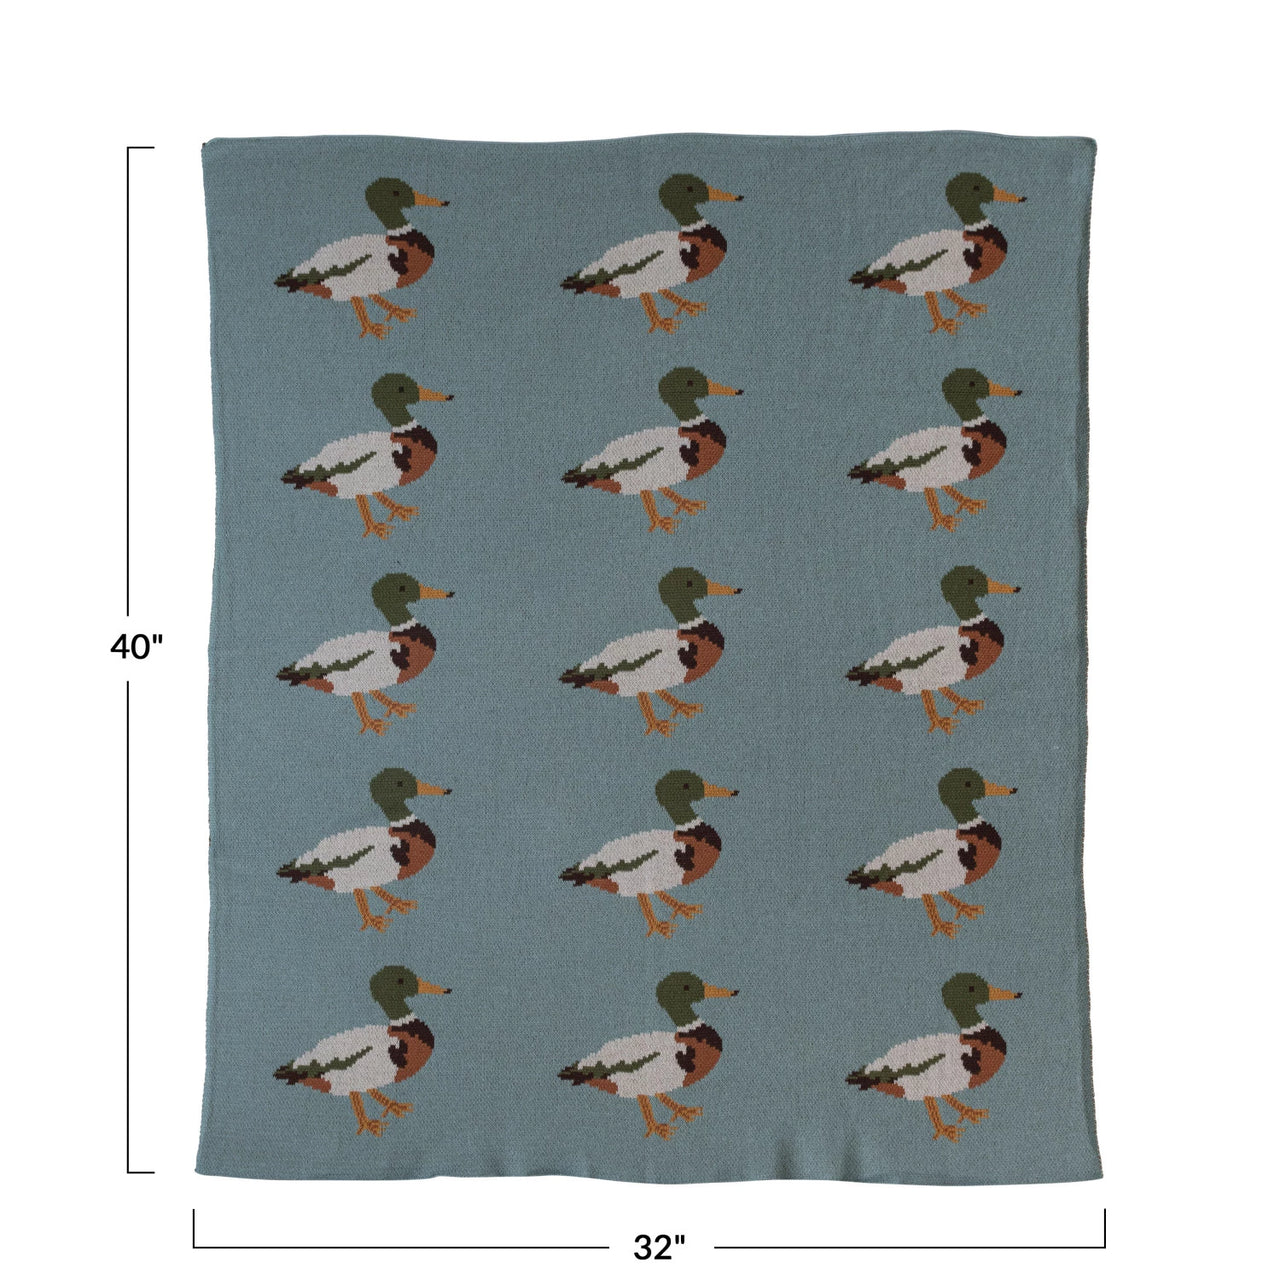 Cotton Knit Baby Blanket with Ducks